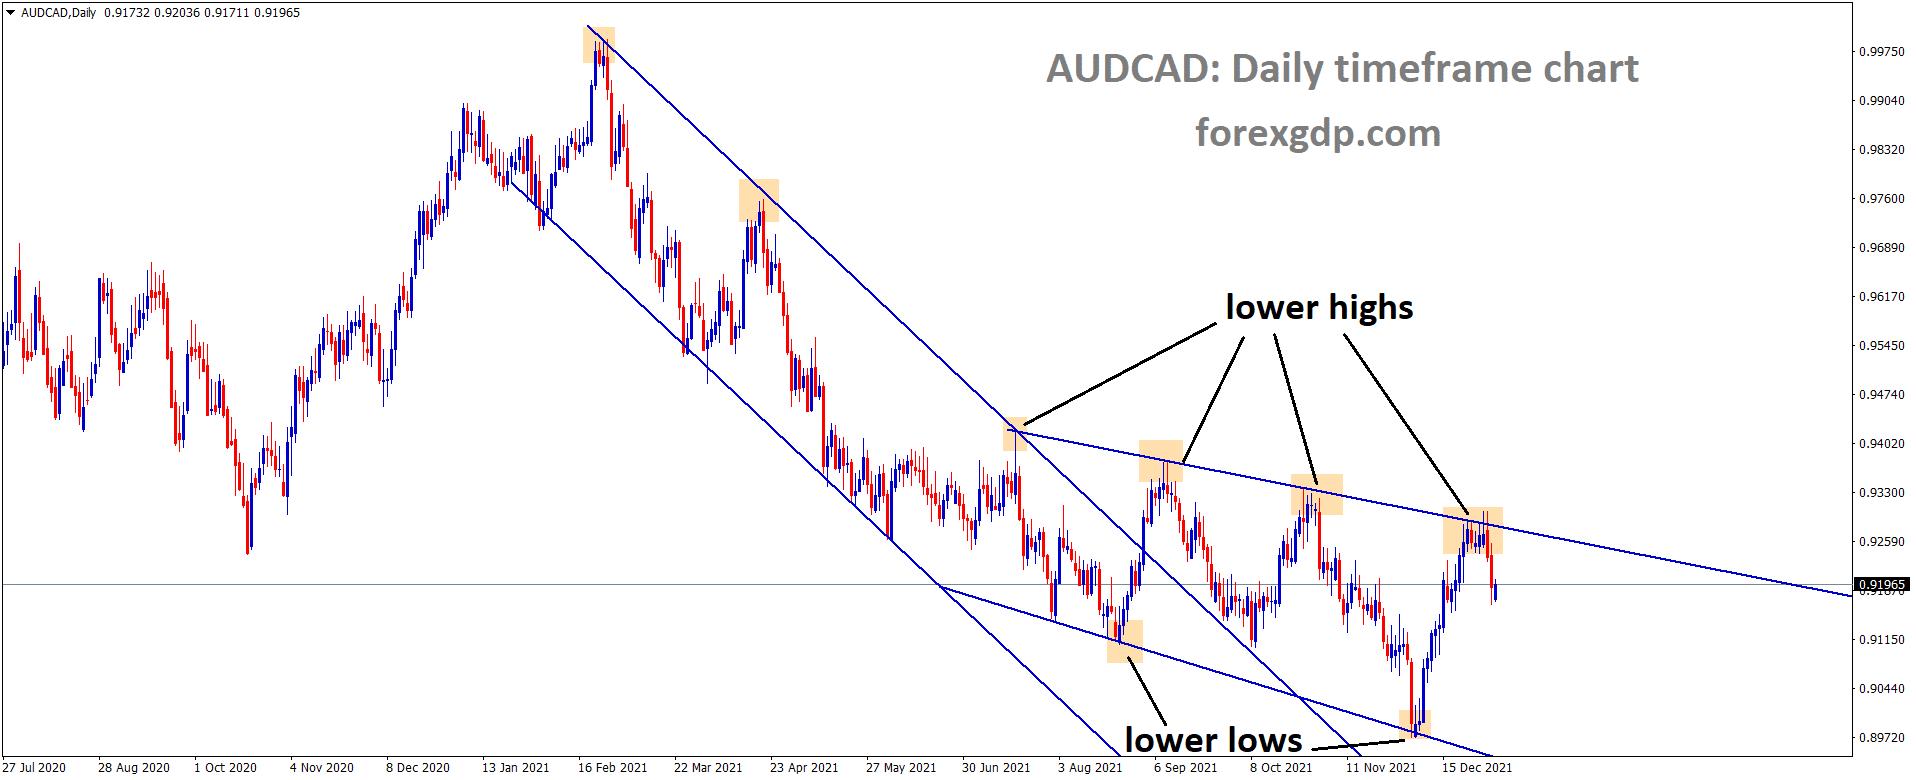 AUDCAD is moving in the Descending channel and the market has fallen from the Lower high area of the channel